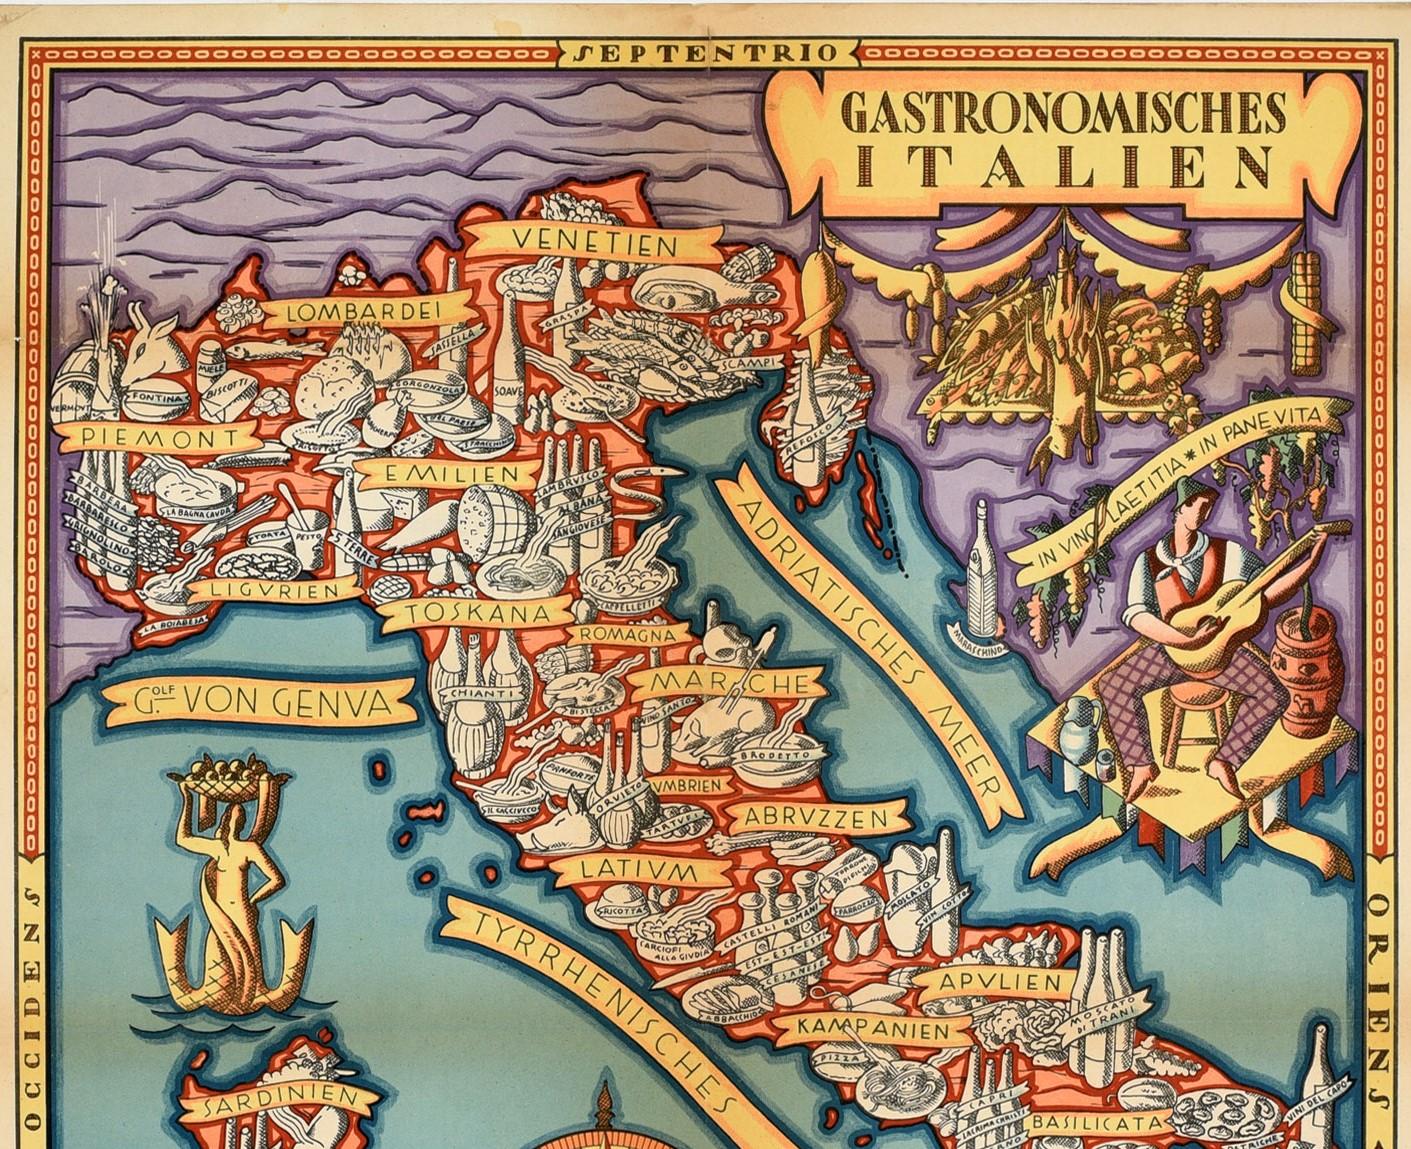 Original vintage poster entitled Gastronomisches Italien / Gastronomic Italy featuring a colourful illustrated map by Umberto Zimelli (1898-1972) detailing the signature food of each region in Italy with stylised lettering in German marking the